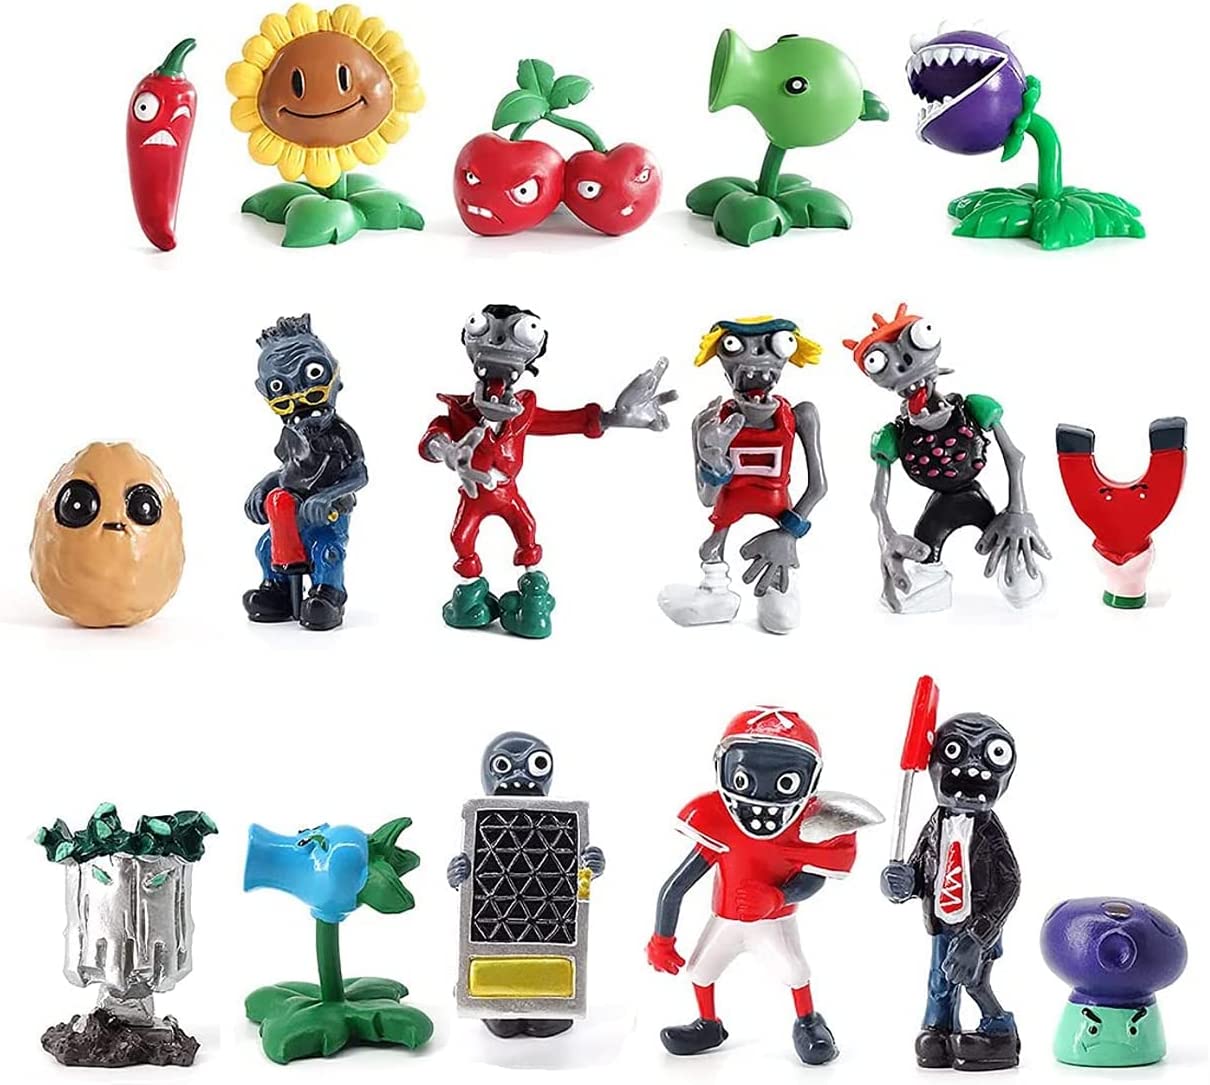  Maikerry Plants and Zombies Figurines 12pcs PVZ Action